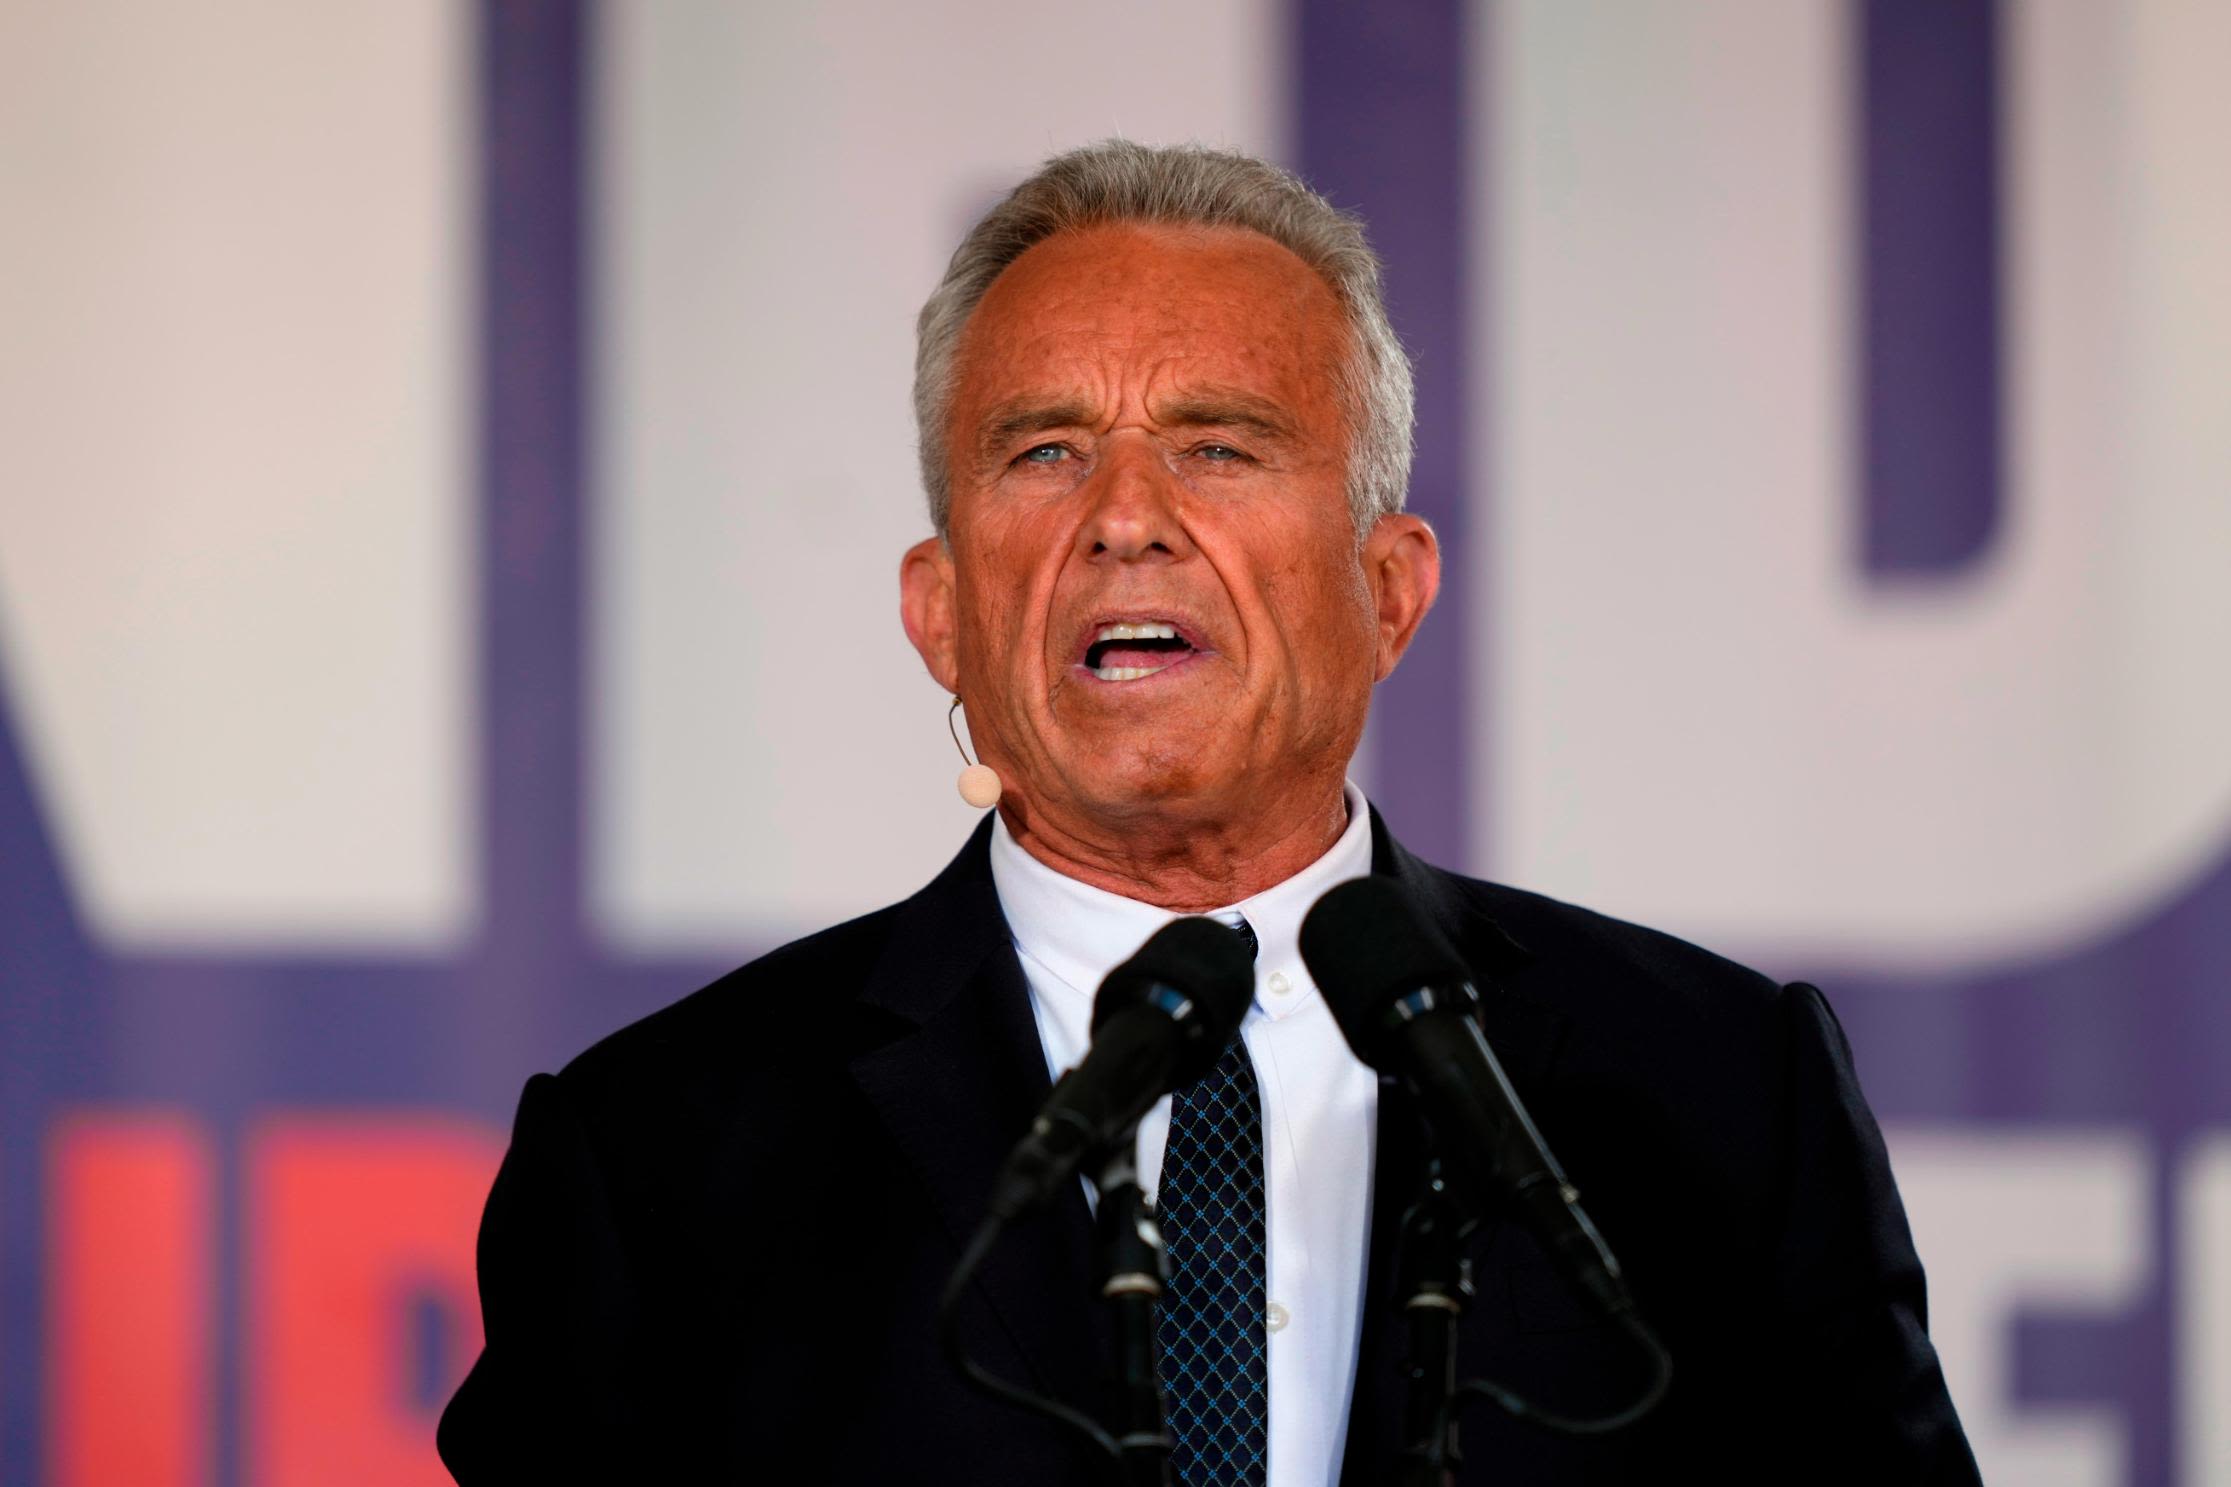 Robert F. Kennedy Jr. announces independent run for president, ending  Democratic primary challenge to Biden